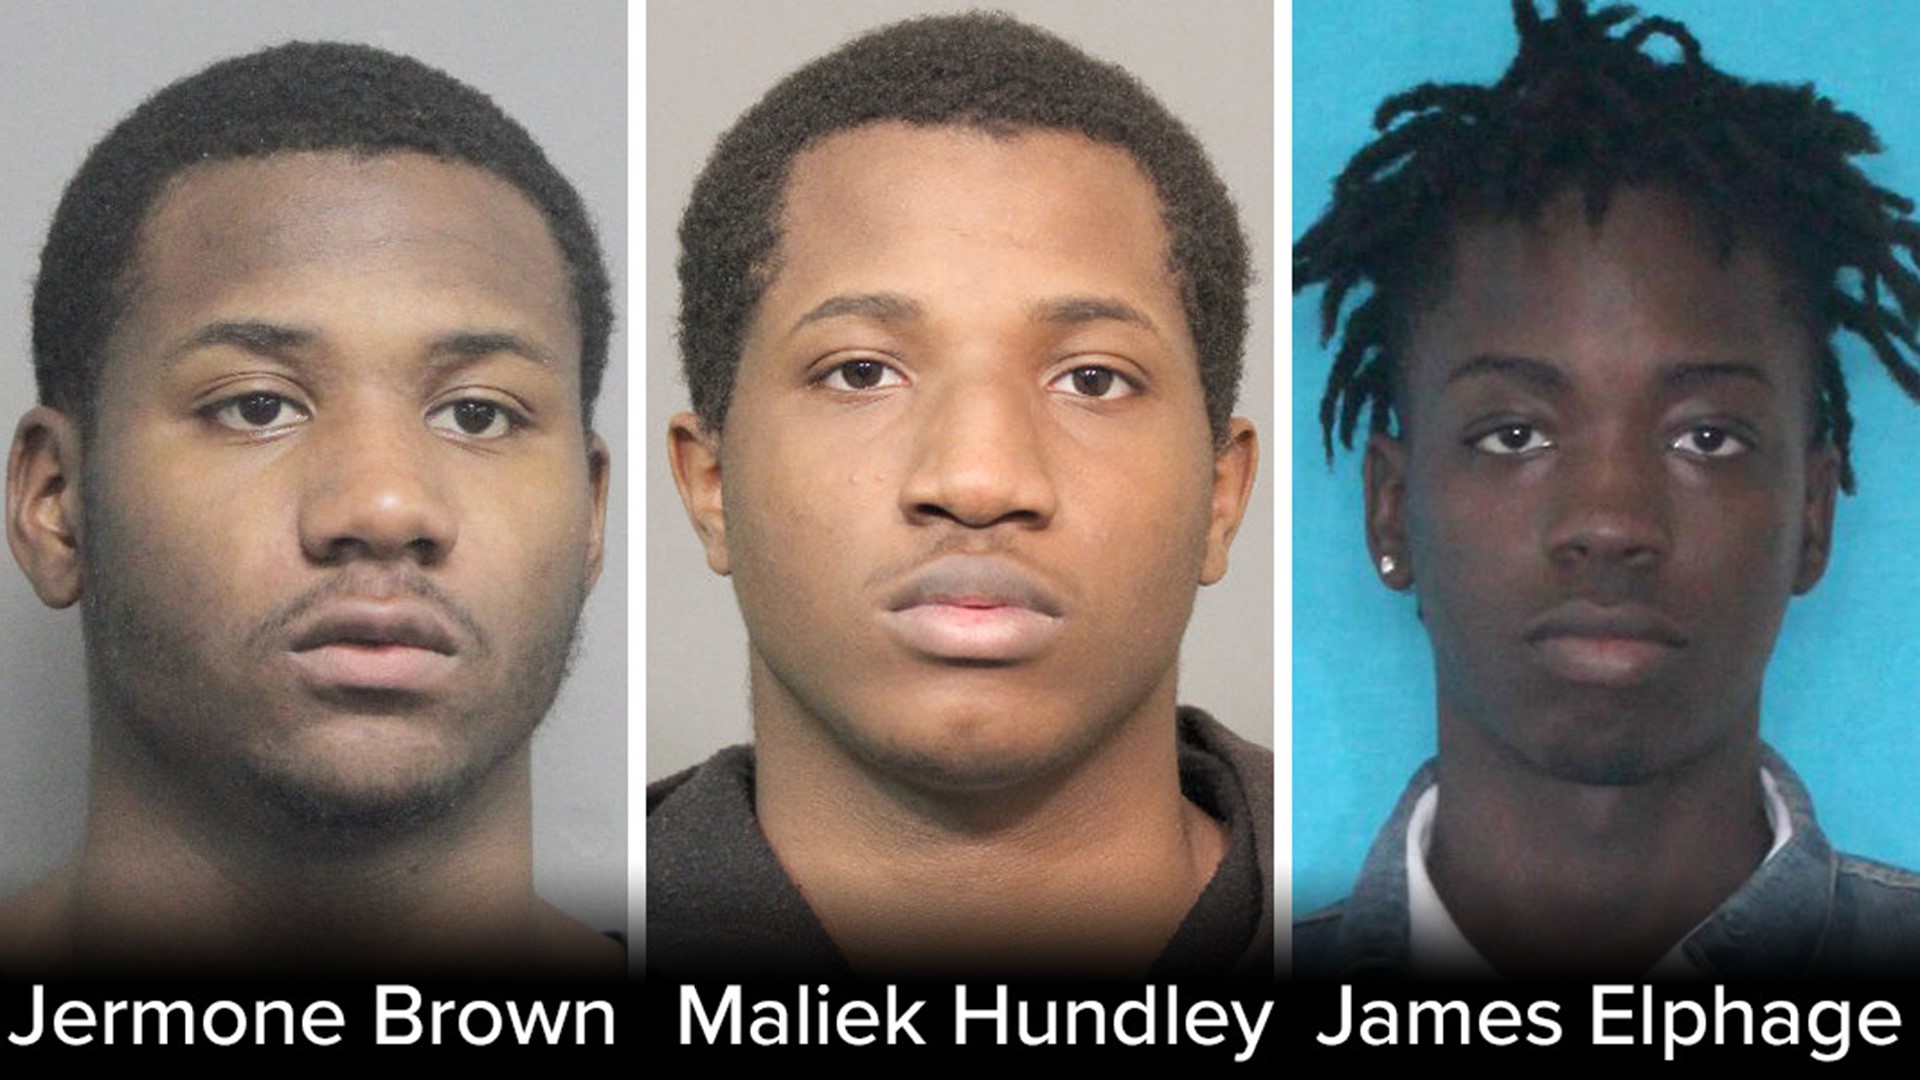 These suspects are believed to be from New Orleans and part of larger groups committing the same crimes in more than one jurisdiction.